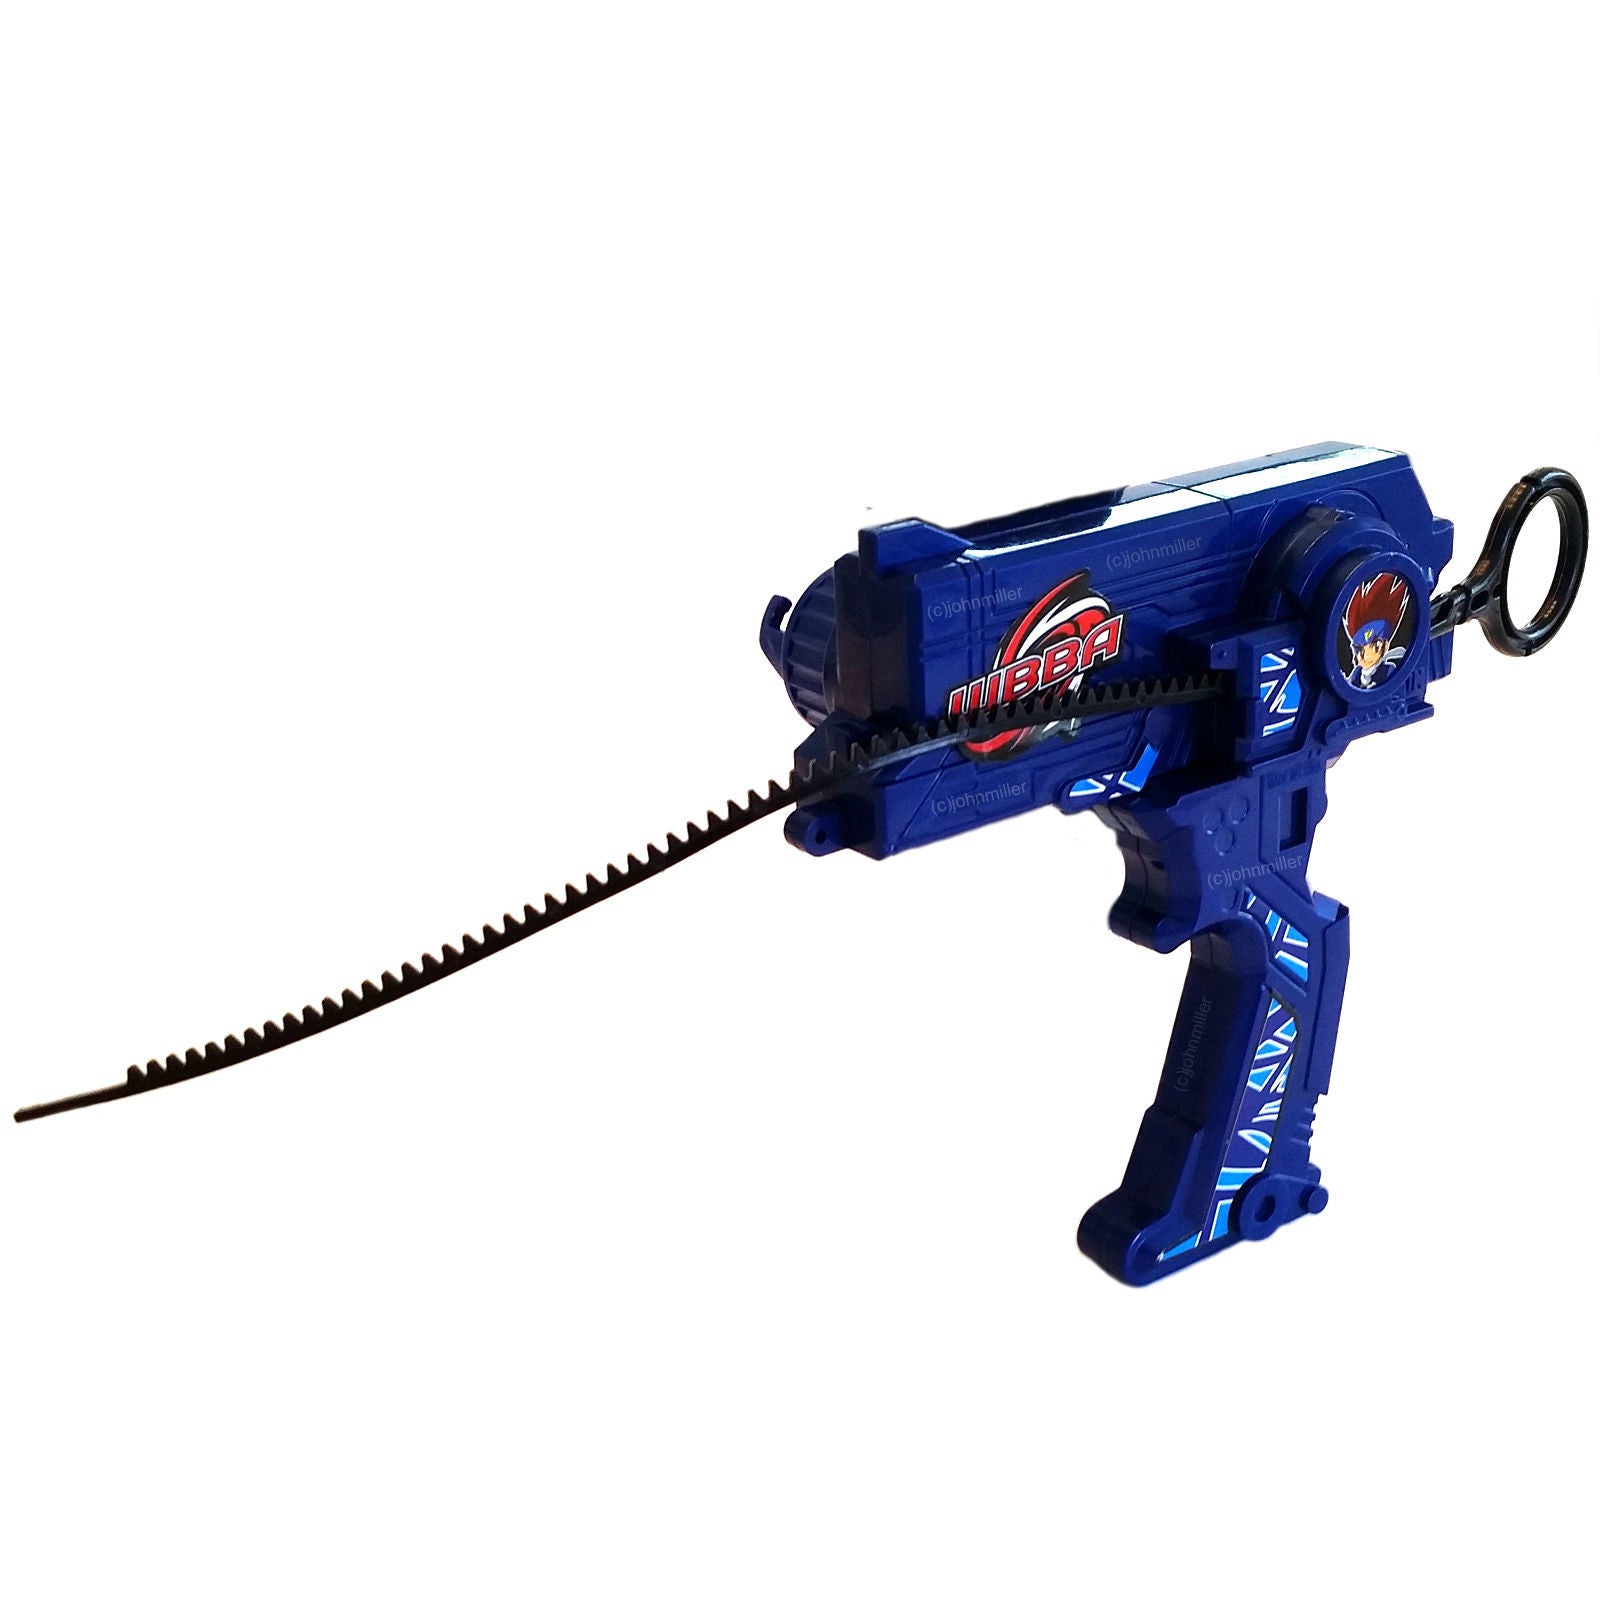 Duotron Dual Launcher / Ripper, WBBA Version For Beyblade - USA SELLER!